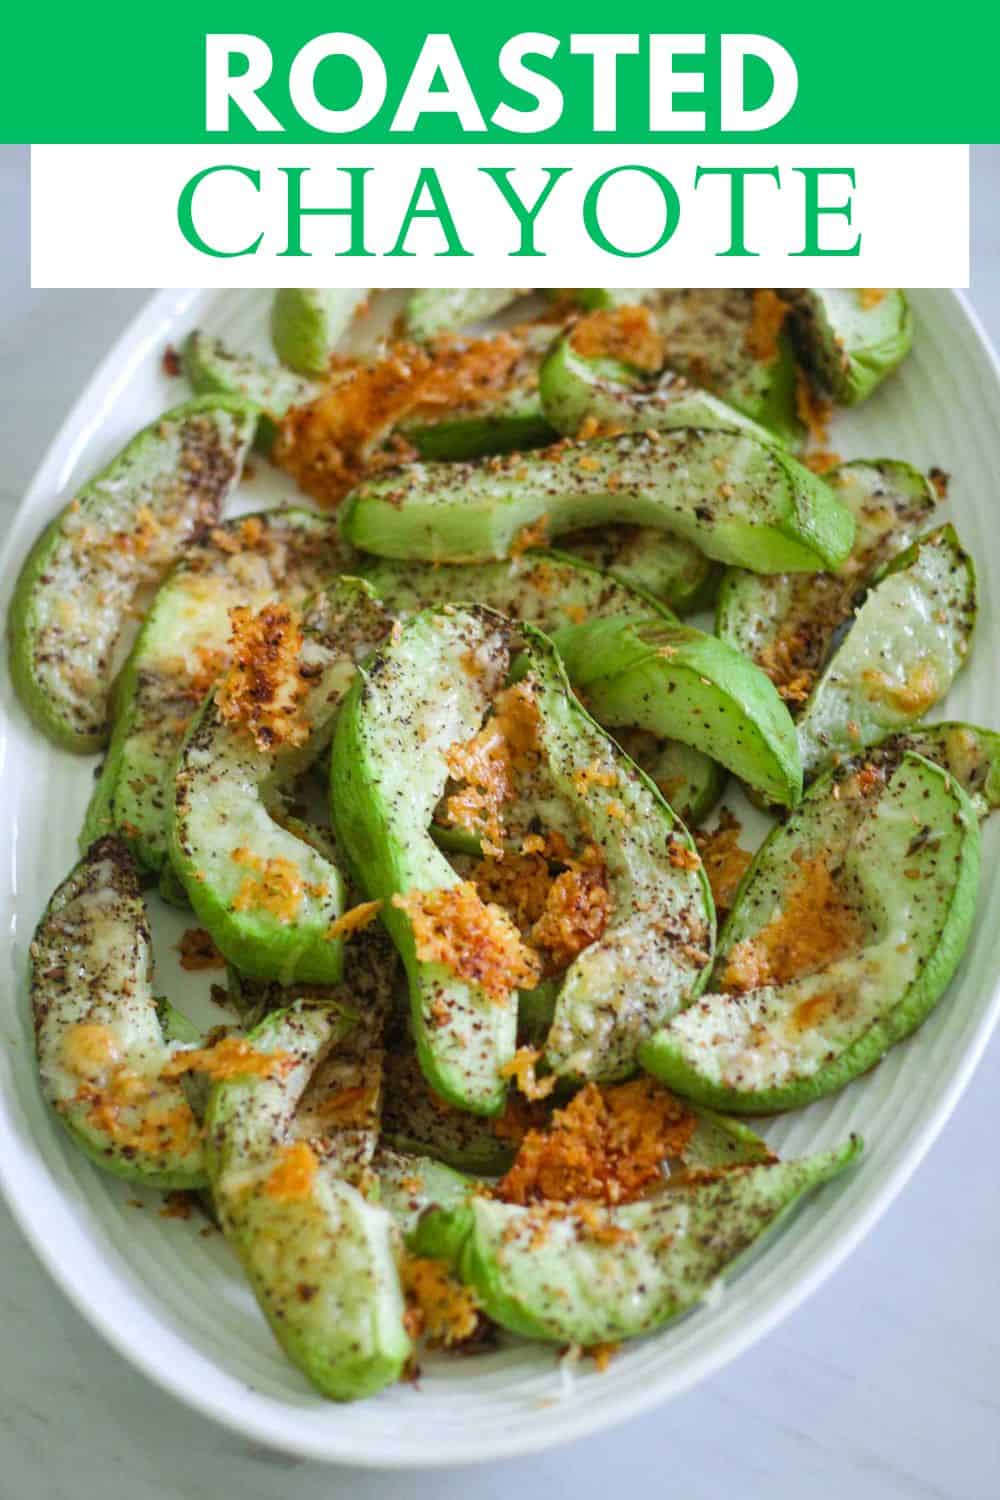 An image prepared for Pinterest, it shows a platter with roasted chayote squash, crispy parmesan and herbs over the slices. There's a title bar over the picture that reads Roasted Chayote.